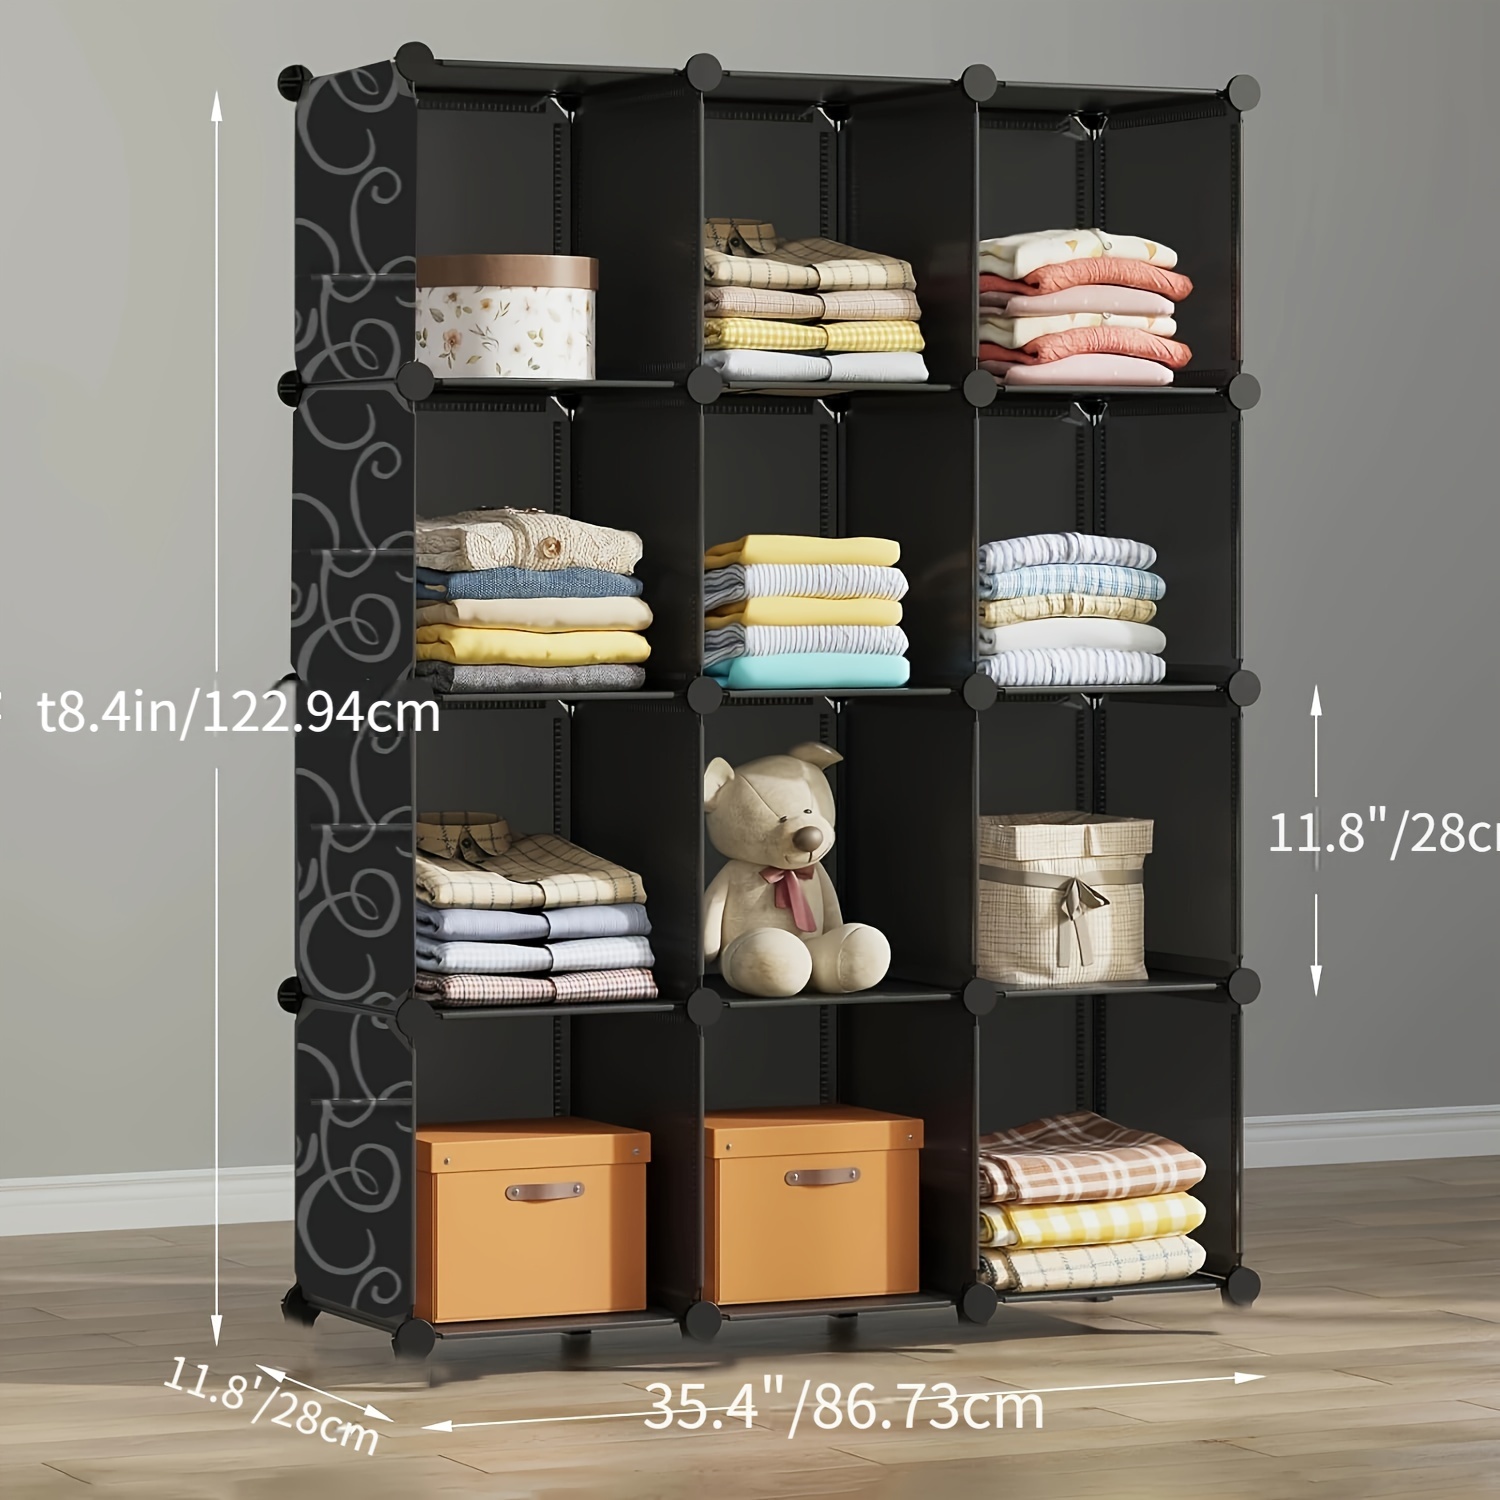 6 12 cube plastic cube book shelf easy assembly clothes storage shelf durable rack for shoes sundries household storage organizer for rental house bedroom living room home dorm entryway